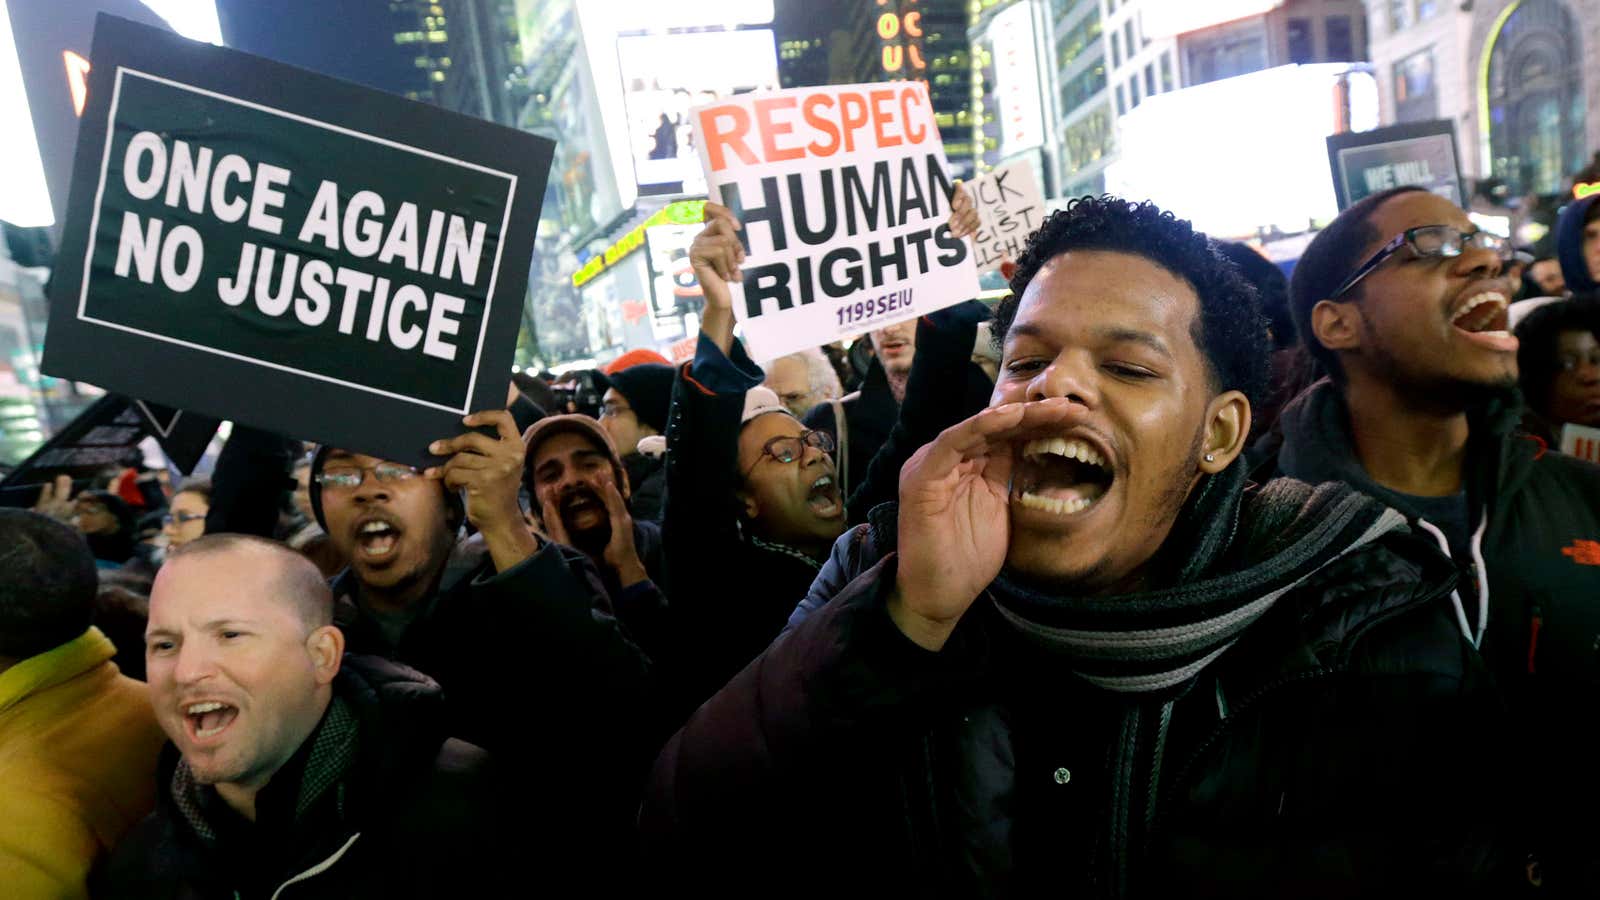 People protest the Staten Island grand jury decision not to indict a police officer after Eric Garner’s death.